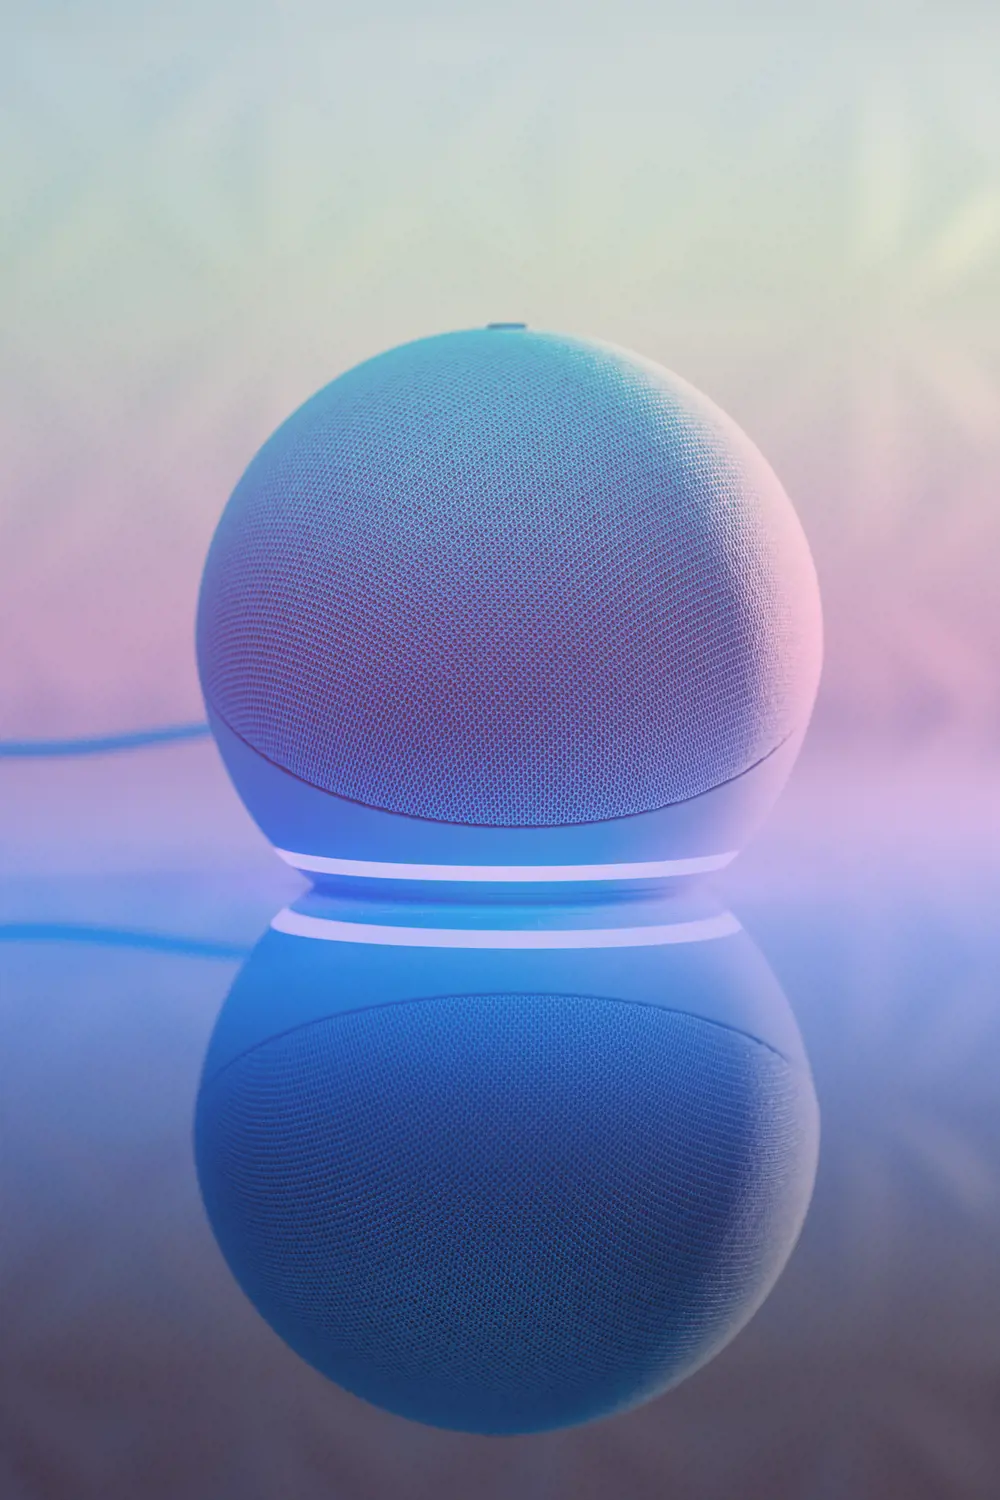 A smart speaker sitting on a reflective surface.